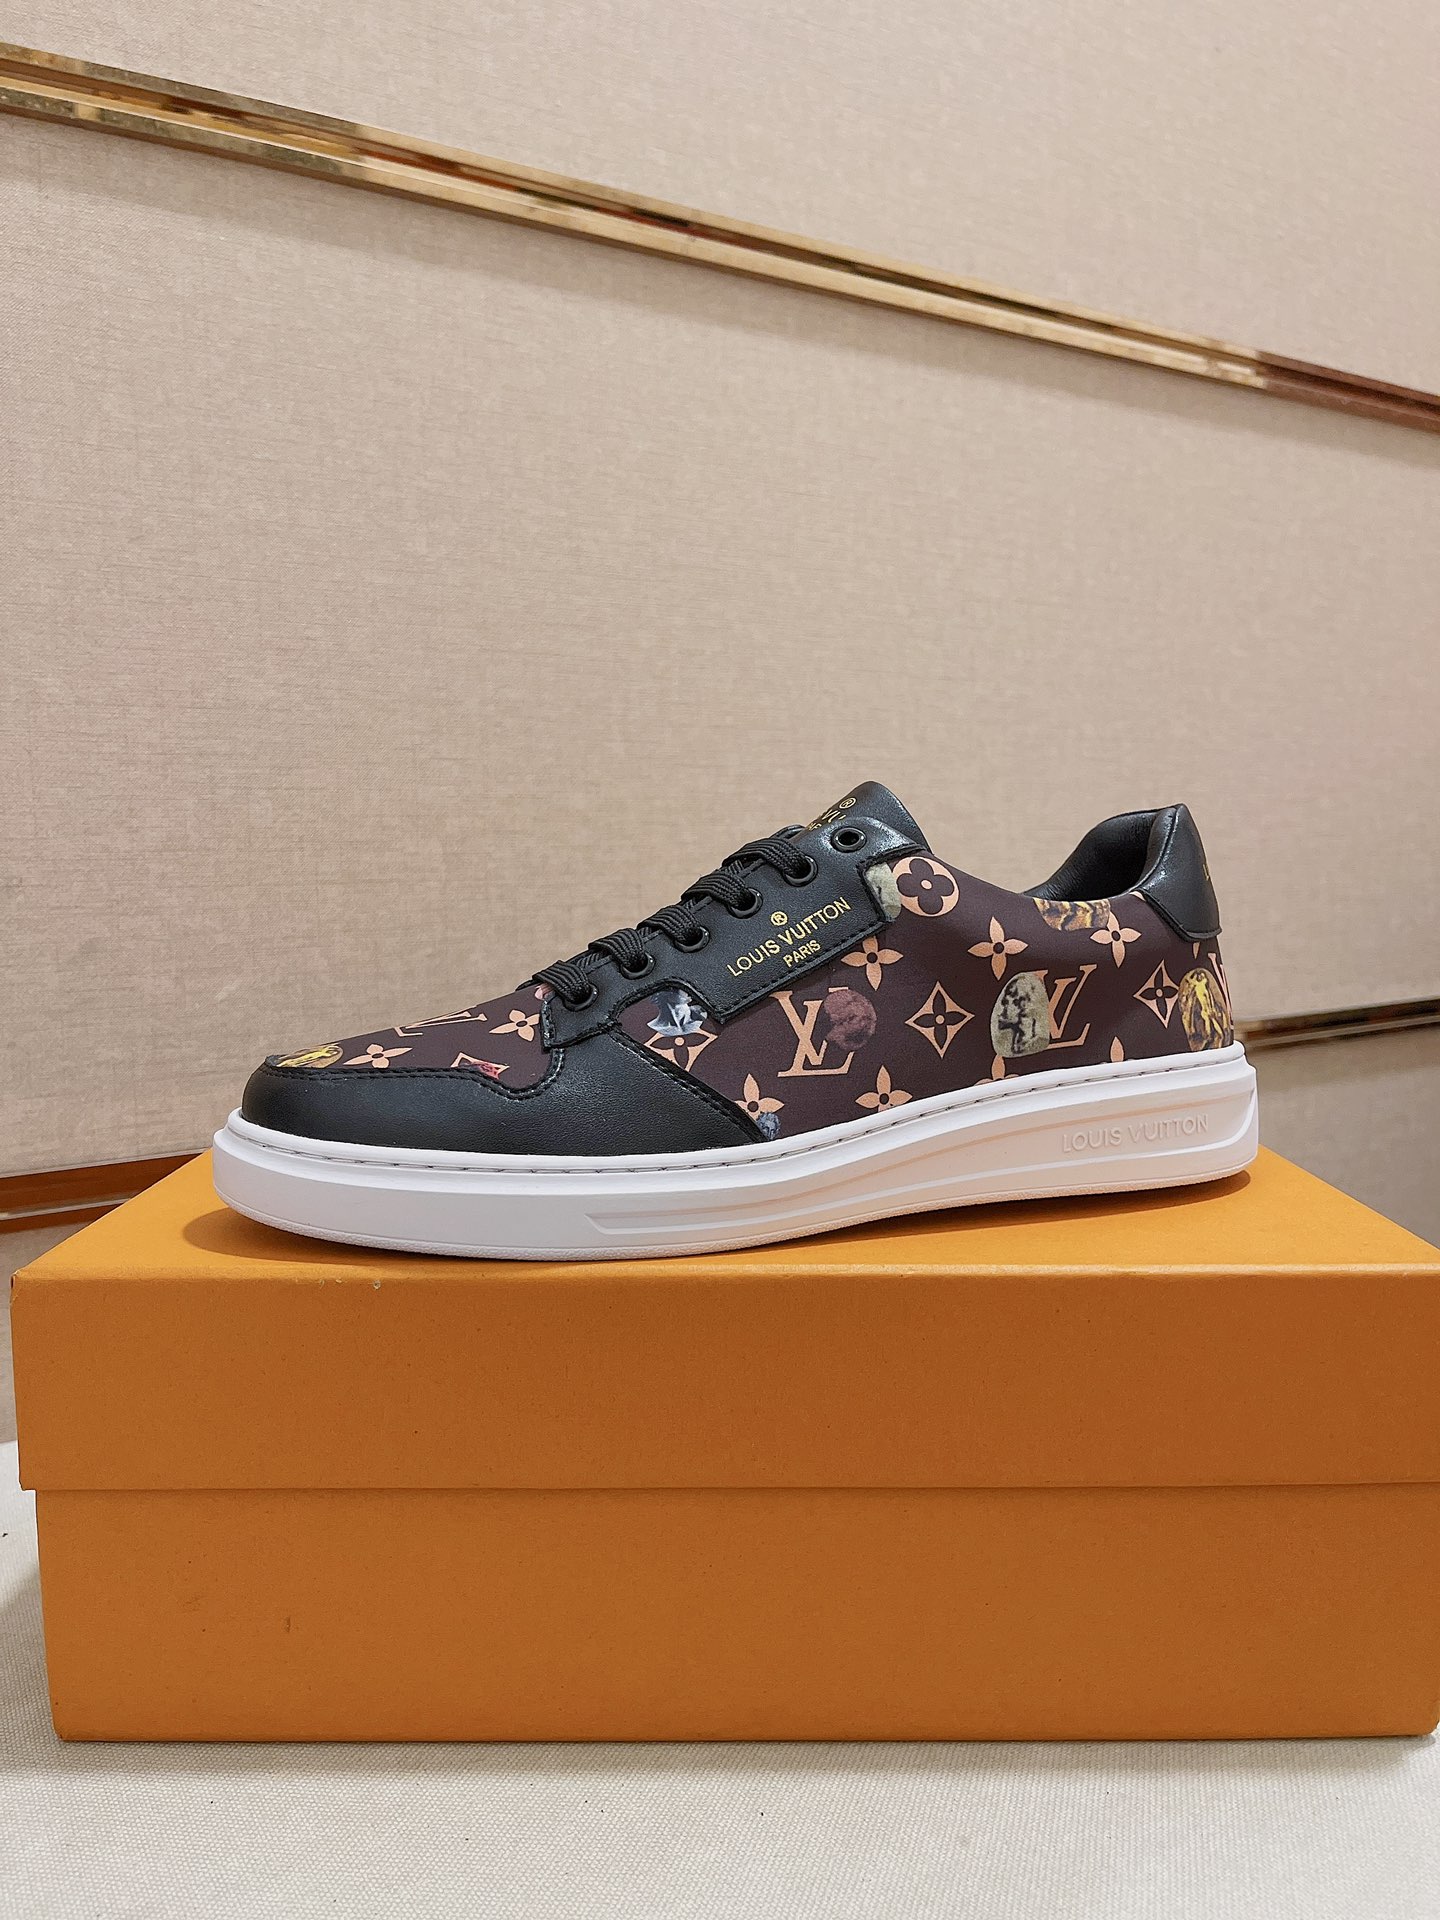 Louis Vuitton Casual Shoes Cowhide Sheepskin Spring/Summer Collection Casual